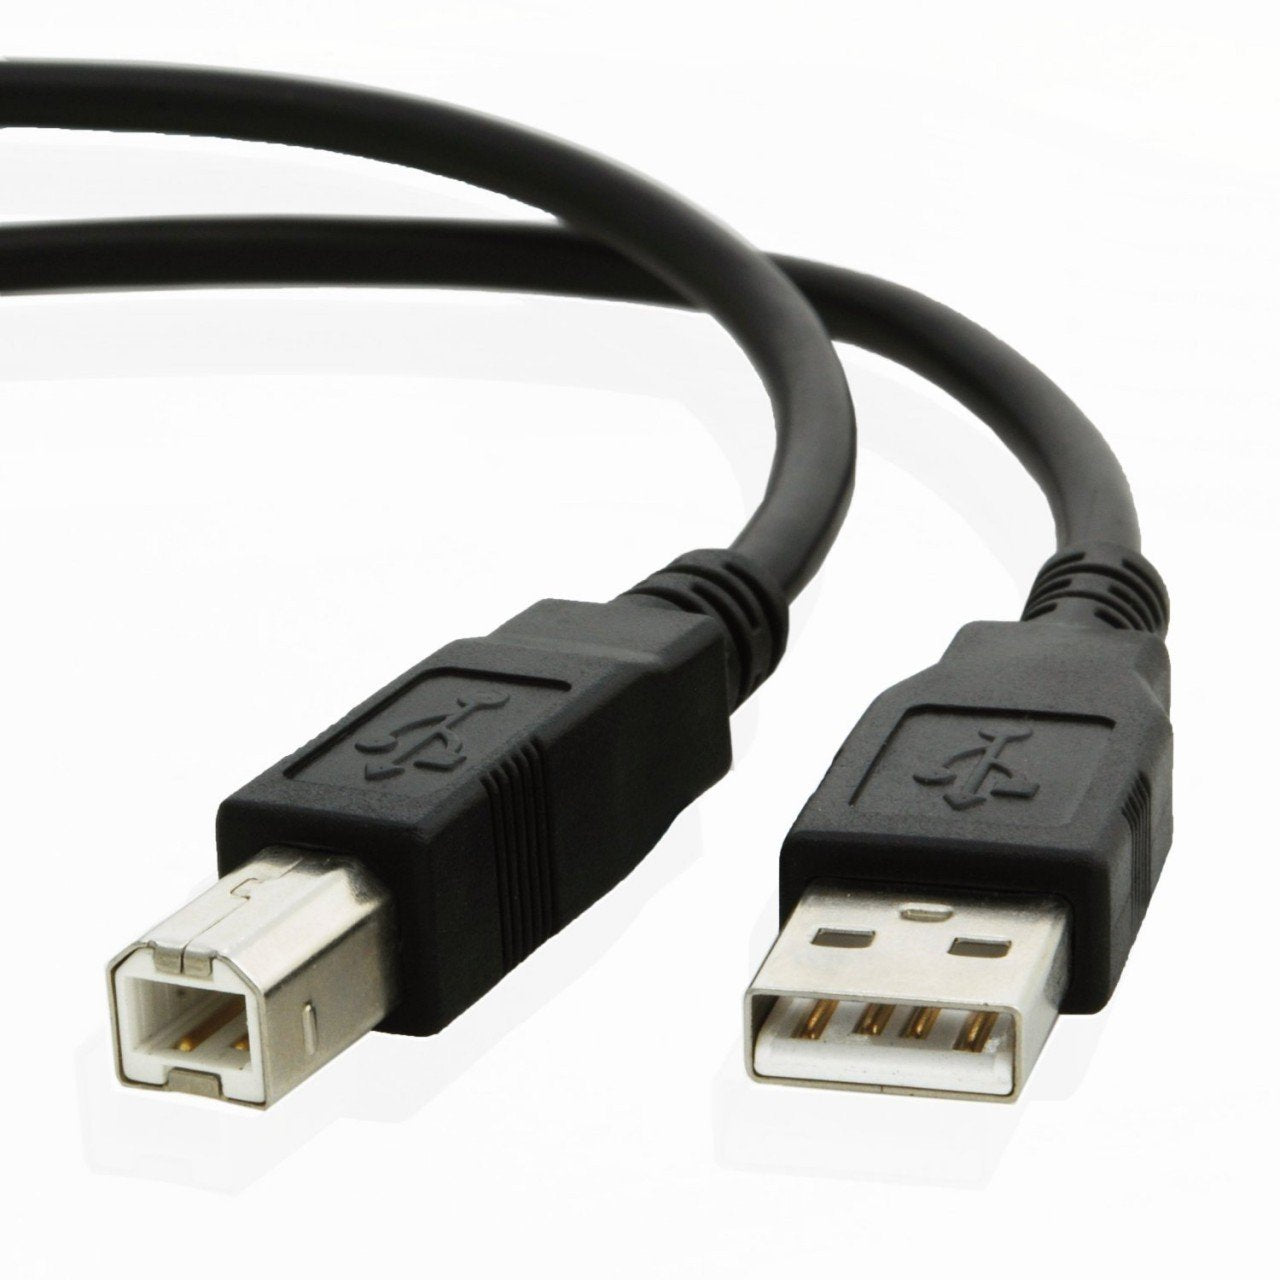 USB cable for Canon PIXMA MG4220